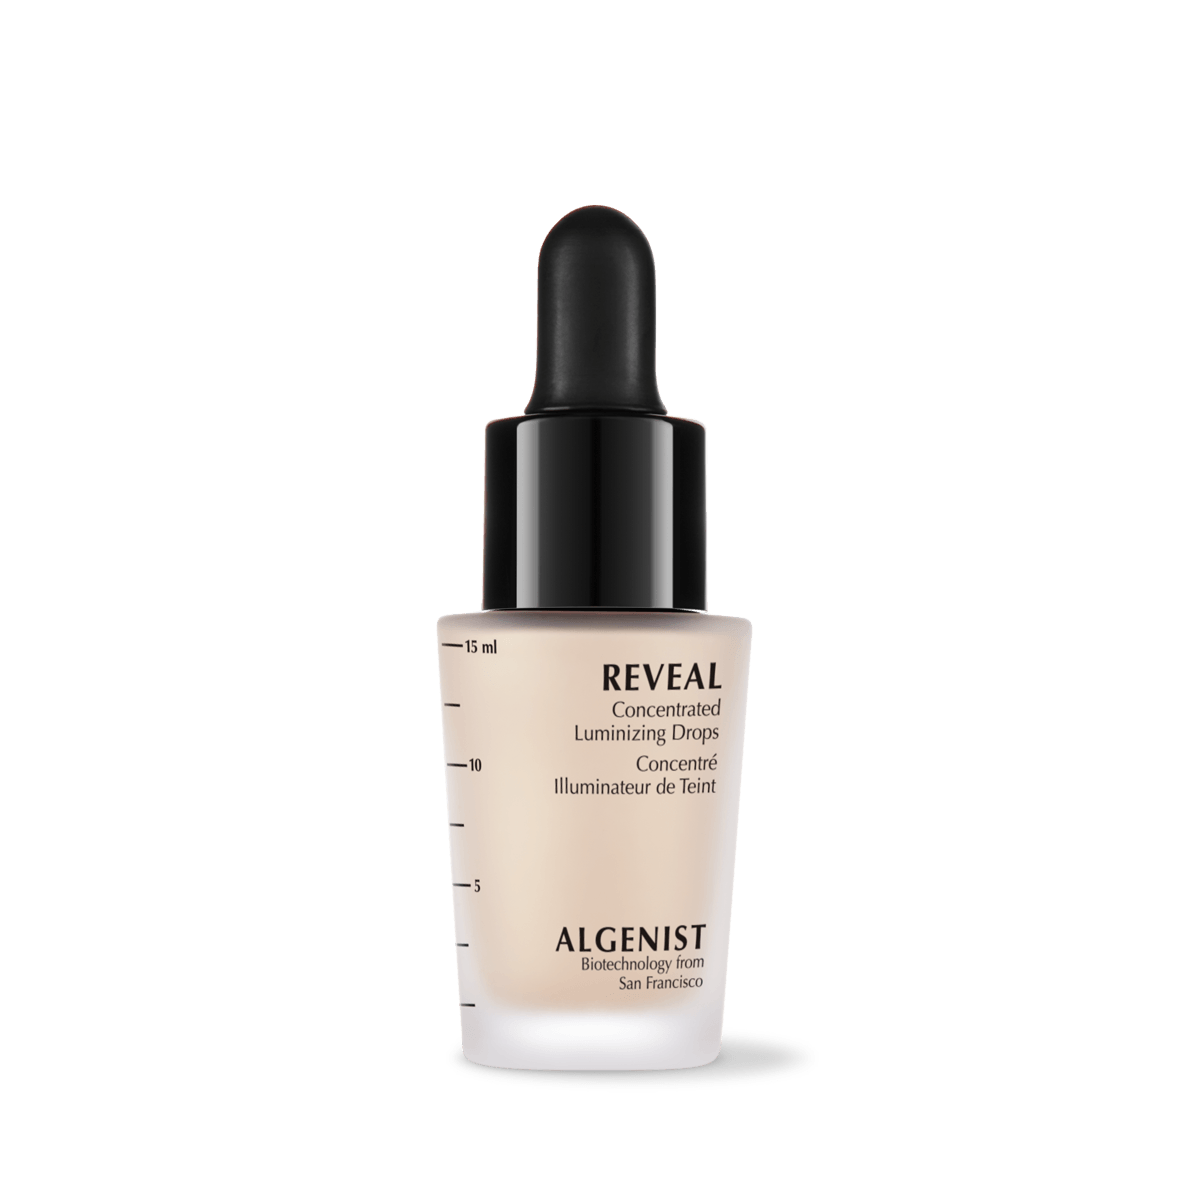 Algenist Reveal Concentrated Luminizing Drops